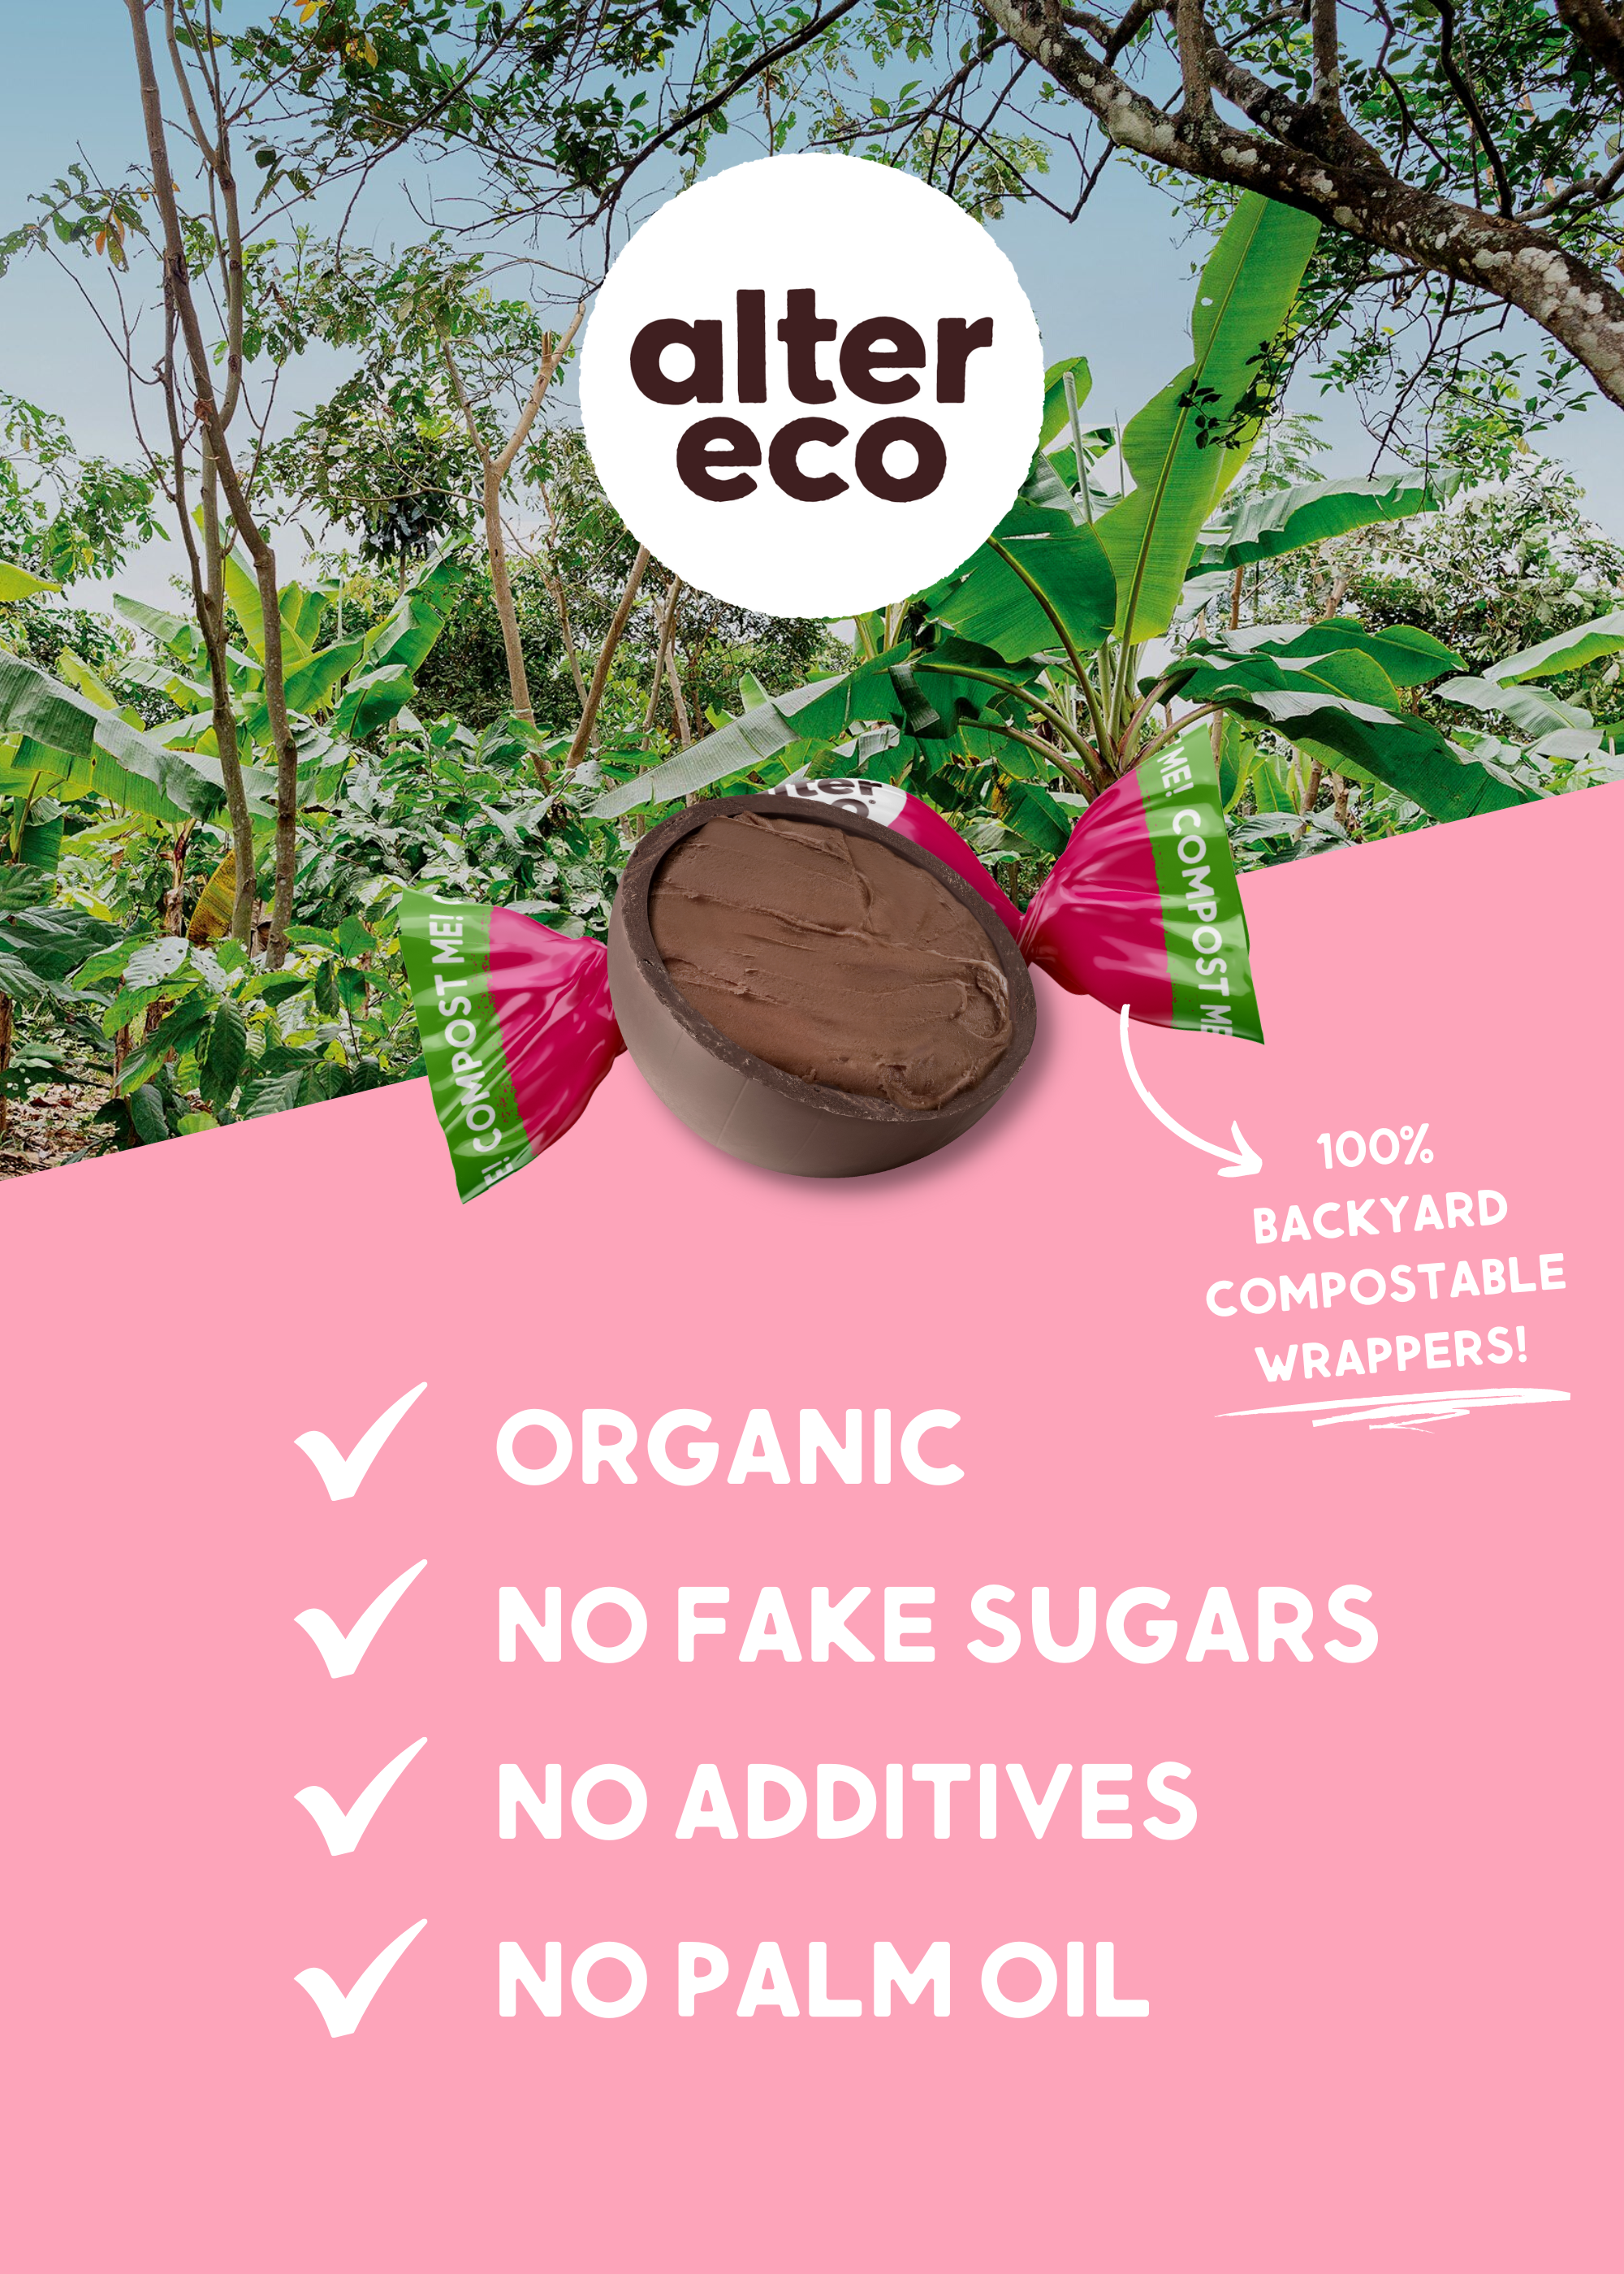 Alter Eco Chocolate Silk Velvet Truffles - 60 count – Healthy Snack  Solutions